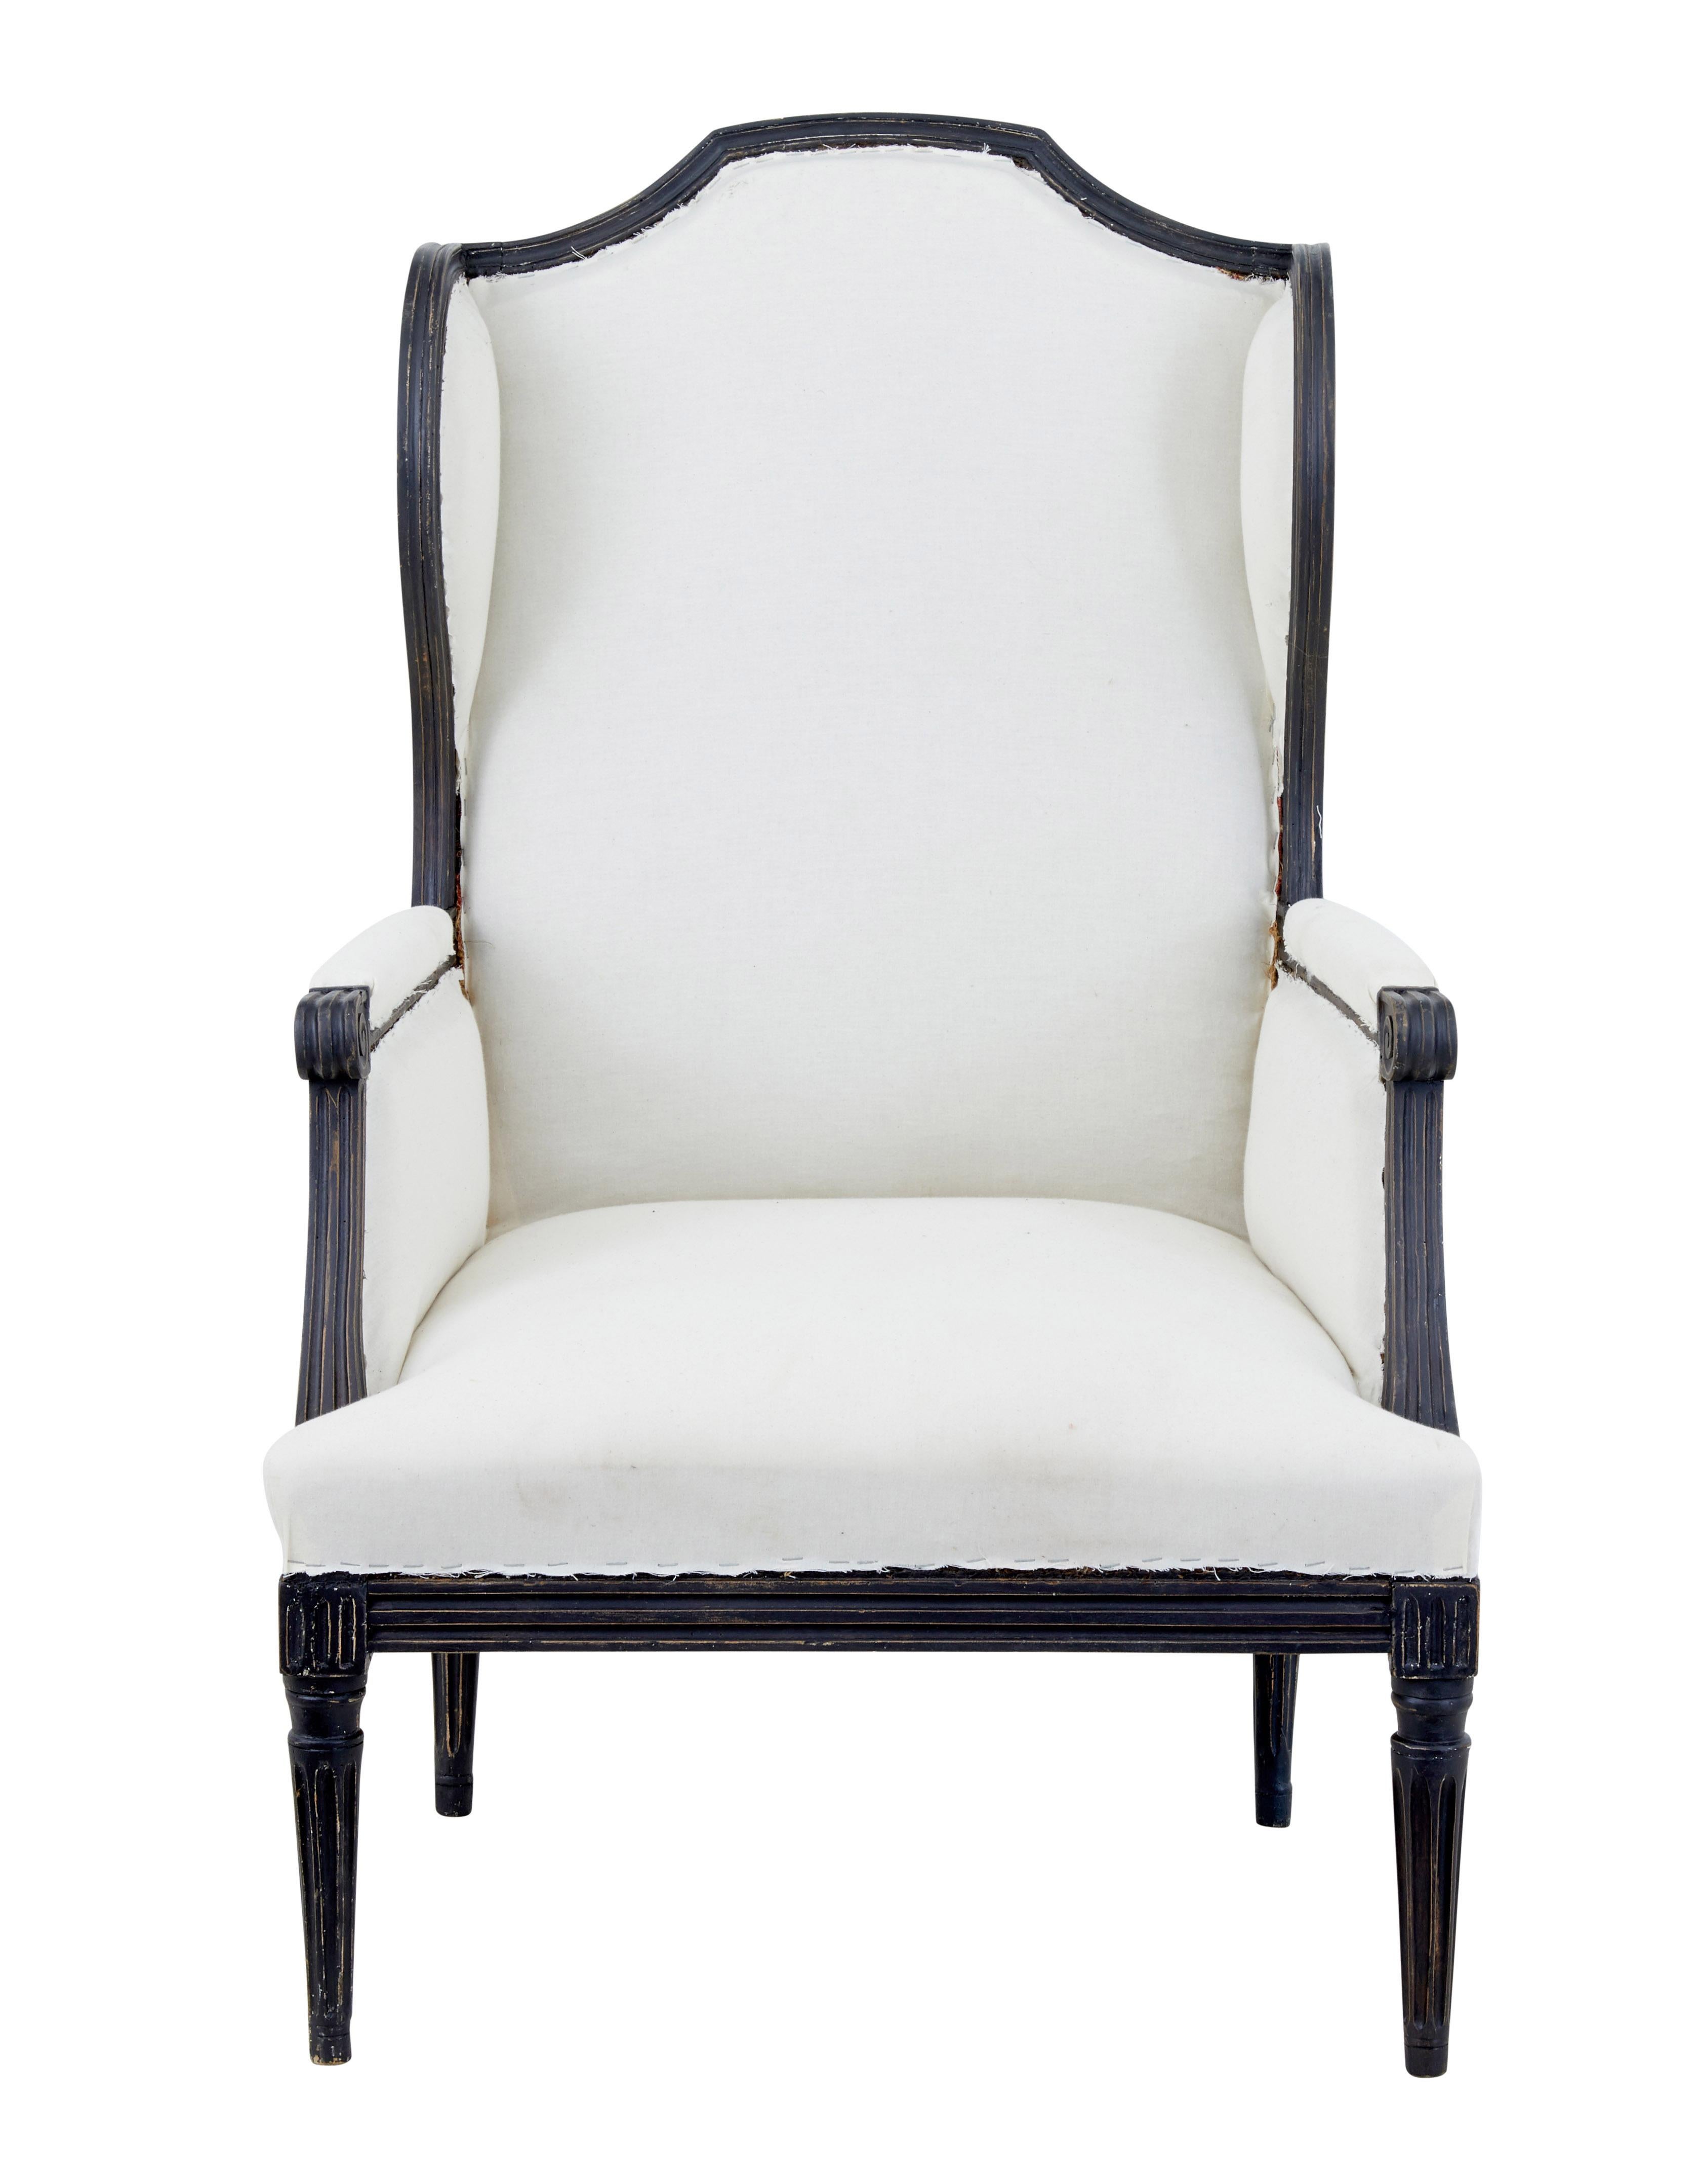 Large French 19th century painted wingback armchair, circa 1880.

Fine 19th century wingback armchair of large proportions.

Very comfortable chair with elegant lines. Carved scroll arms, standing on fluted tapering legs.

Upholstery in good